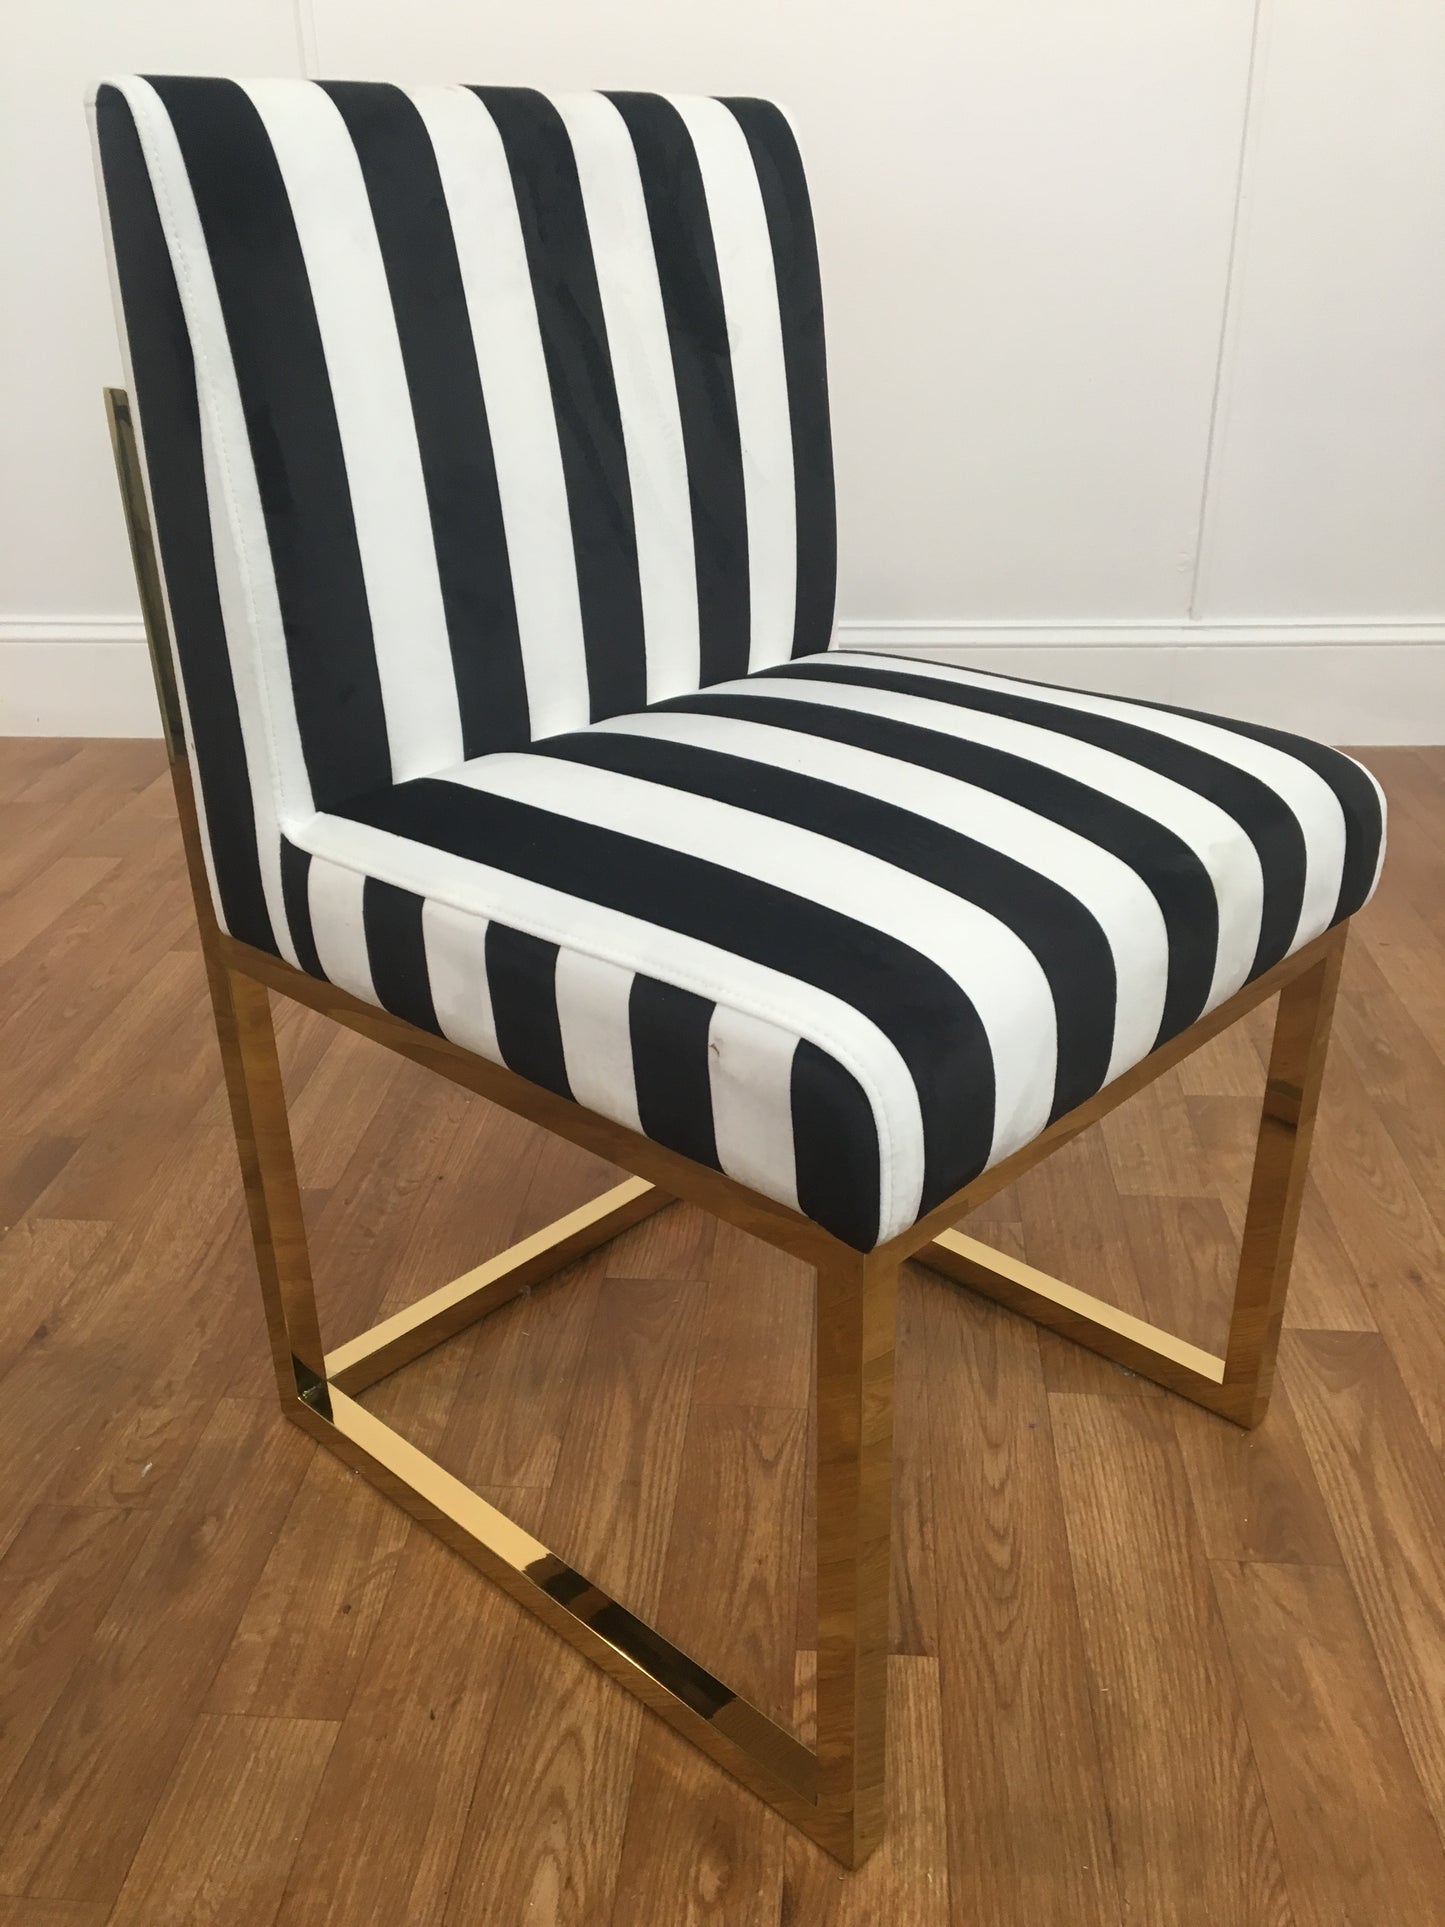 BLACK AND WHITE STRIPED ARMLESS DINING CHAIR